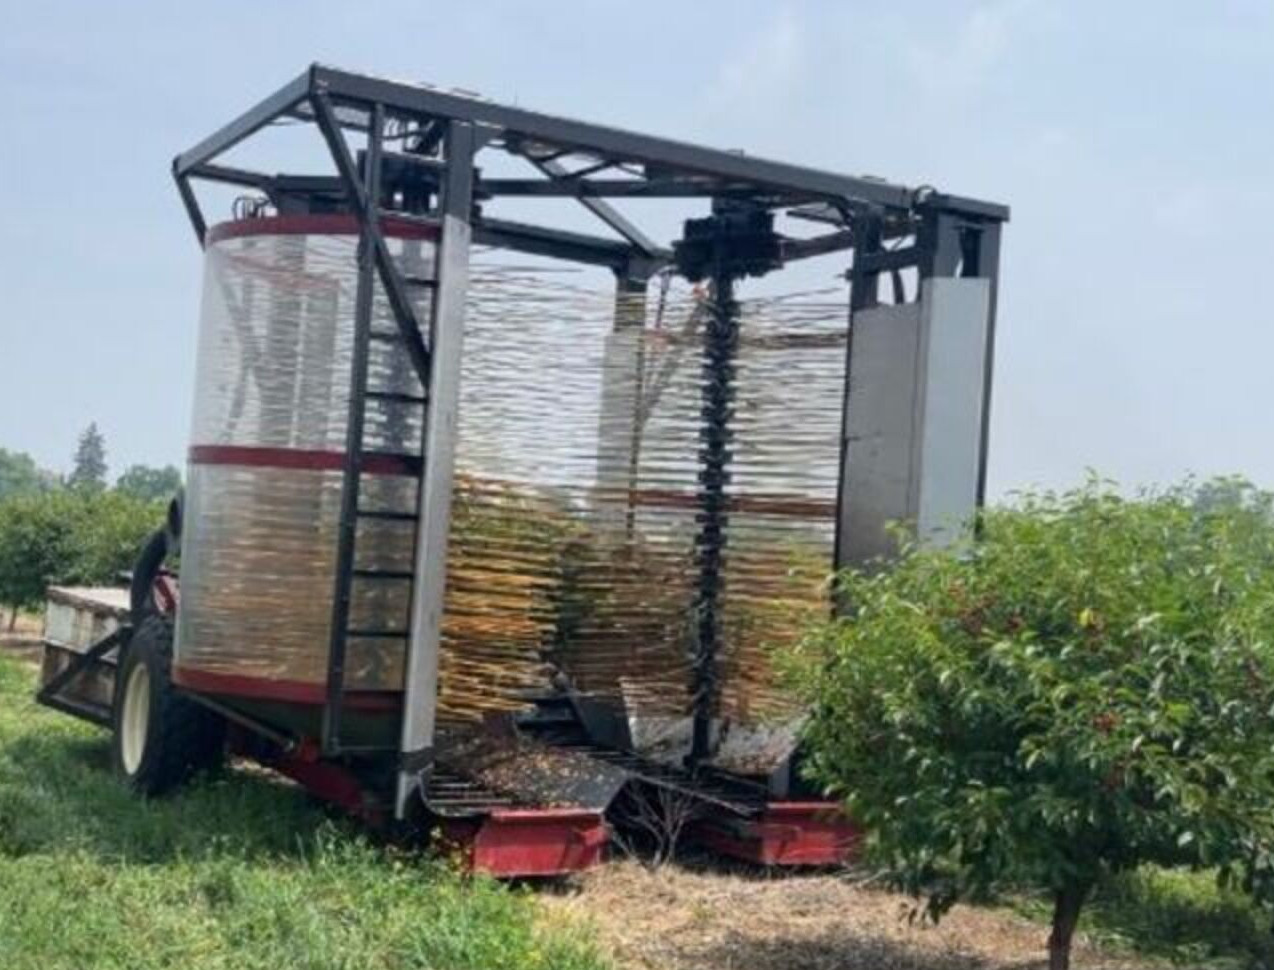 Michigan growers used for the first time a customized blueberry harvester for tart cherry harvest season